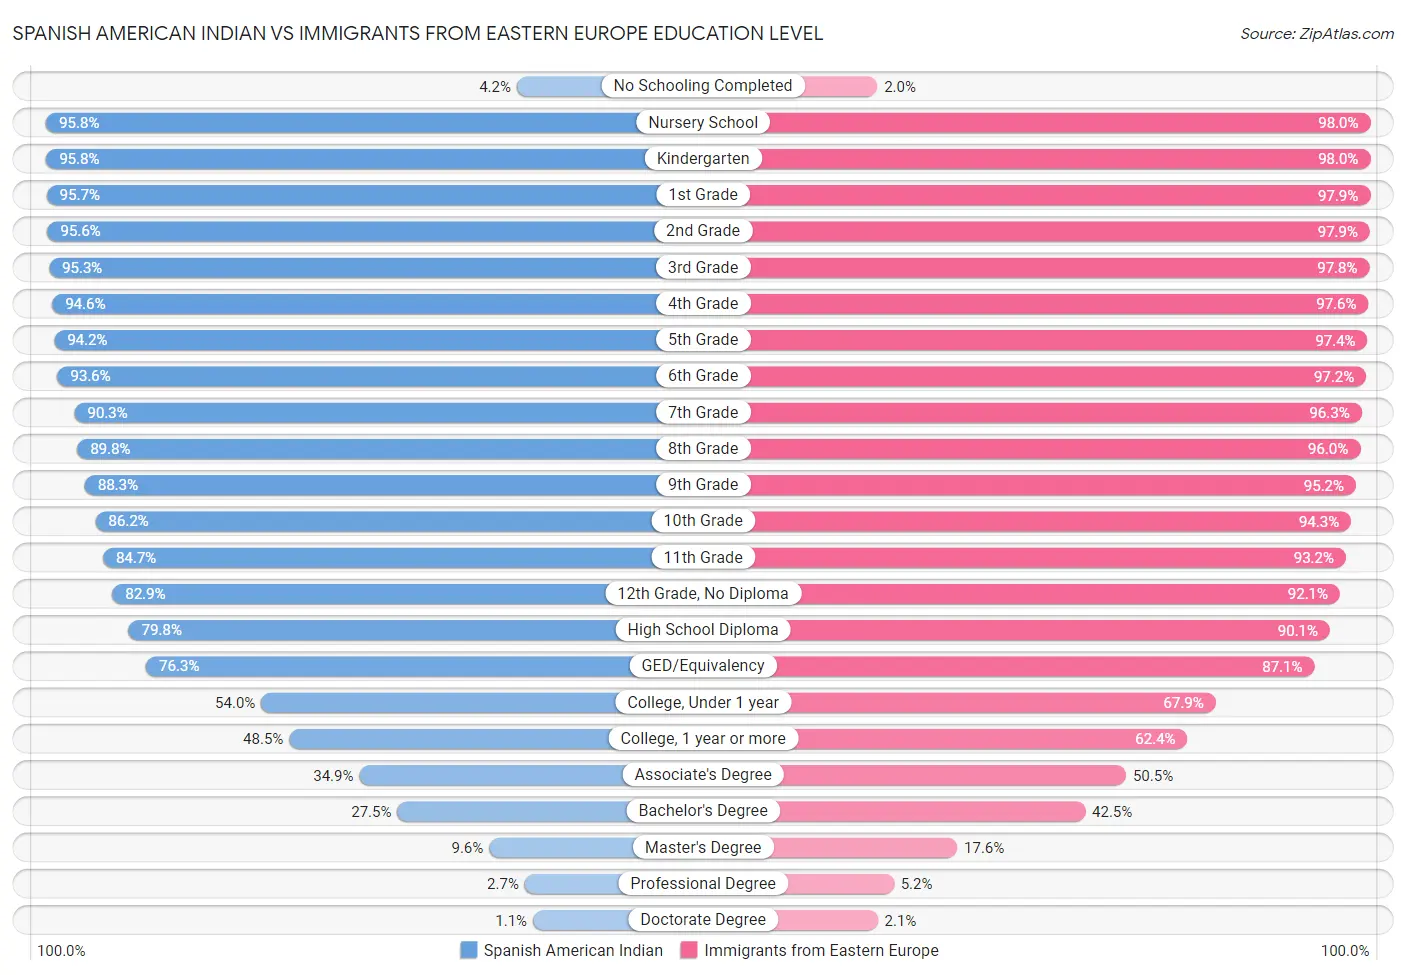 Spanish American Indian vs Immigrants from Eastern Europe Education Level